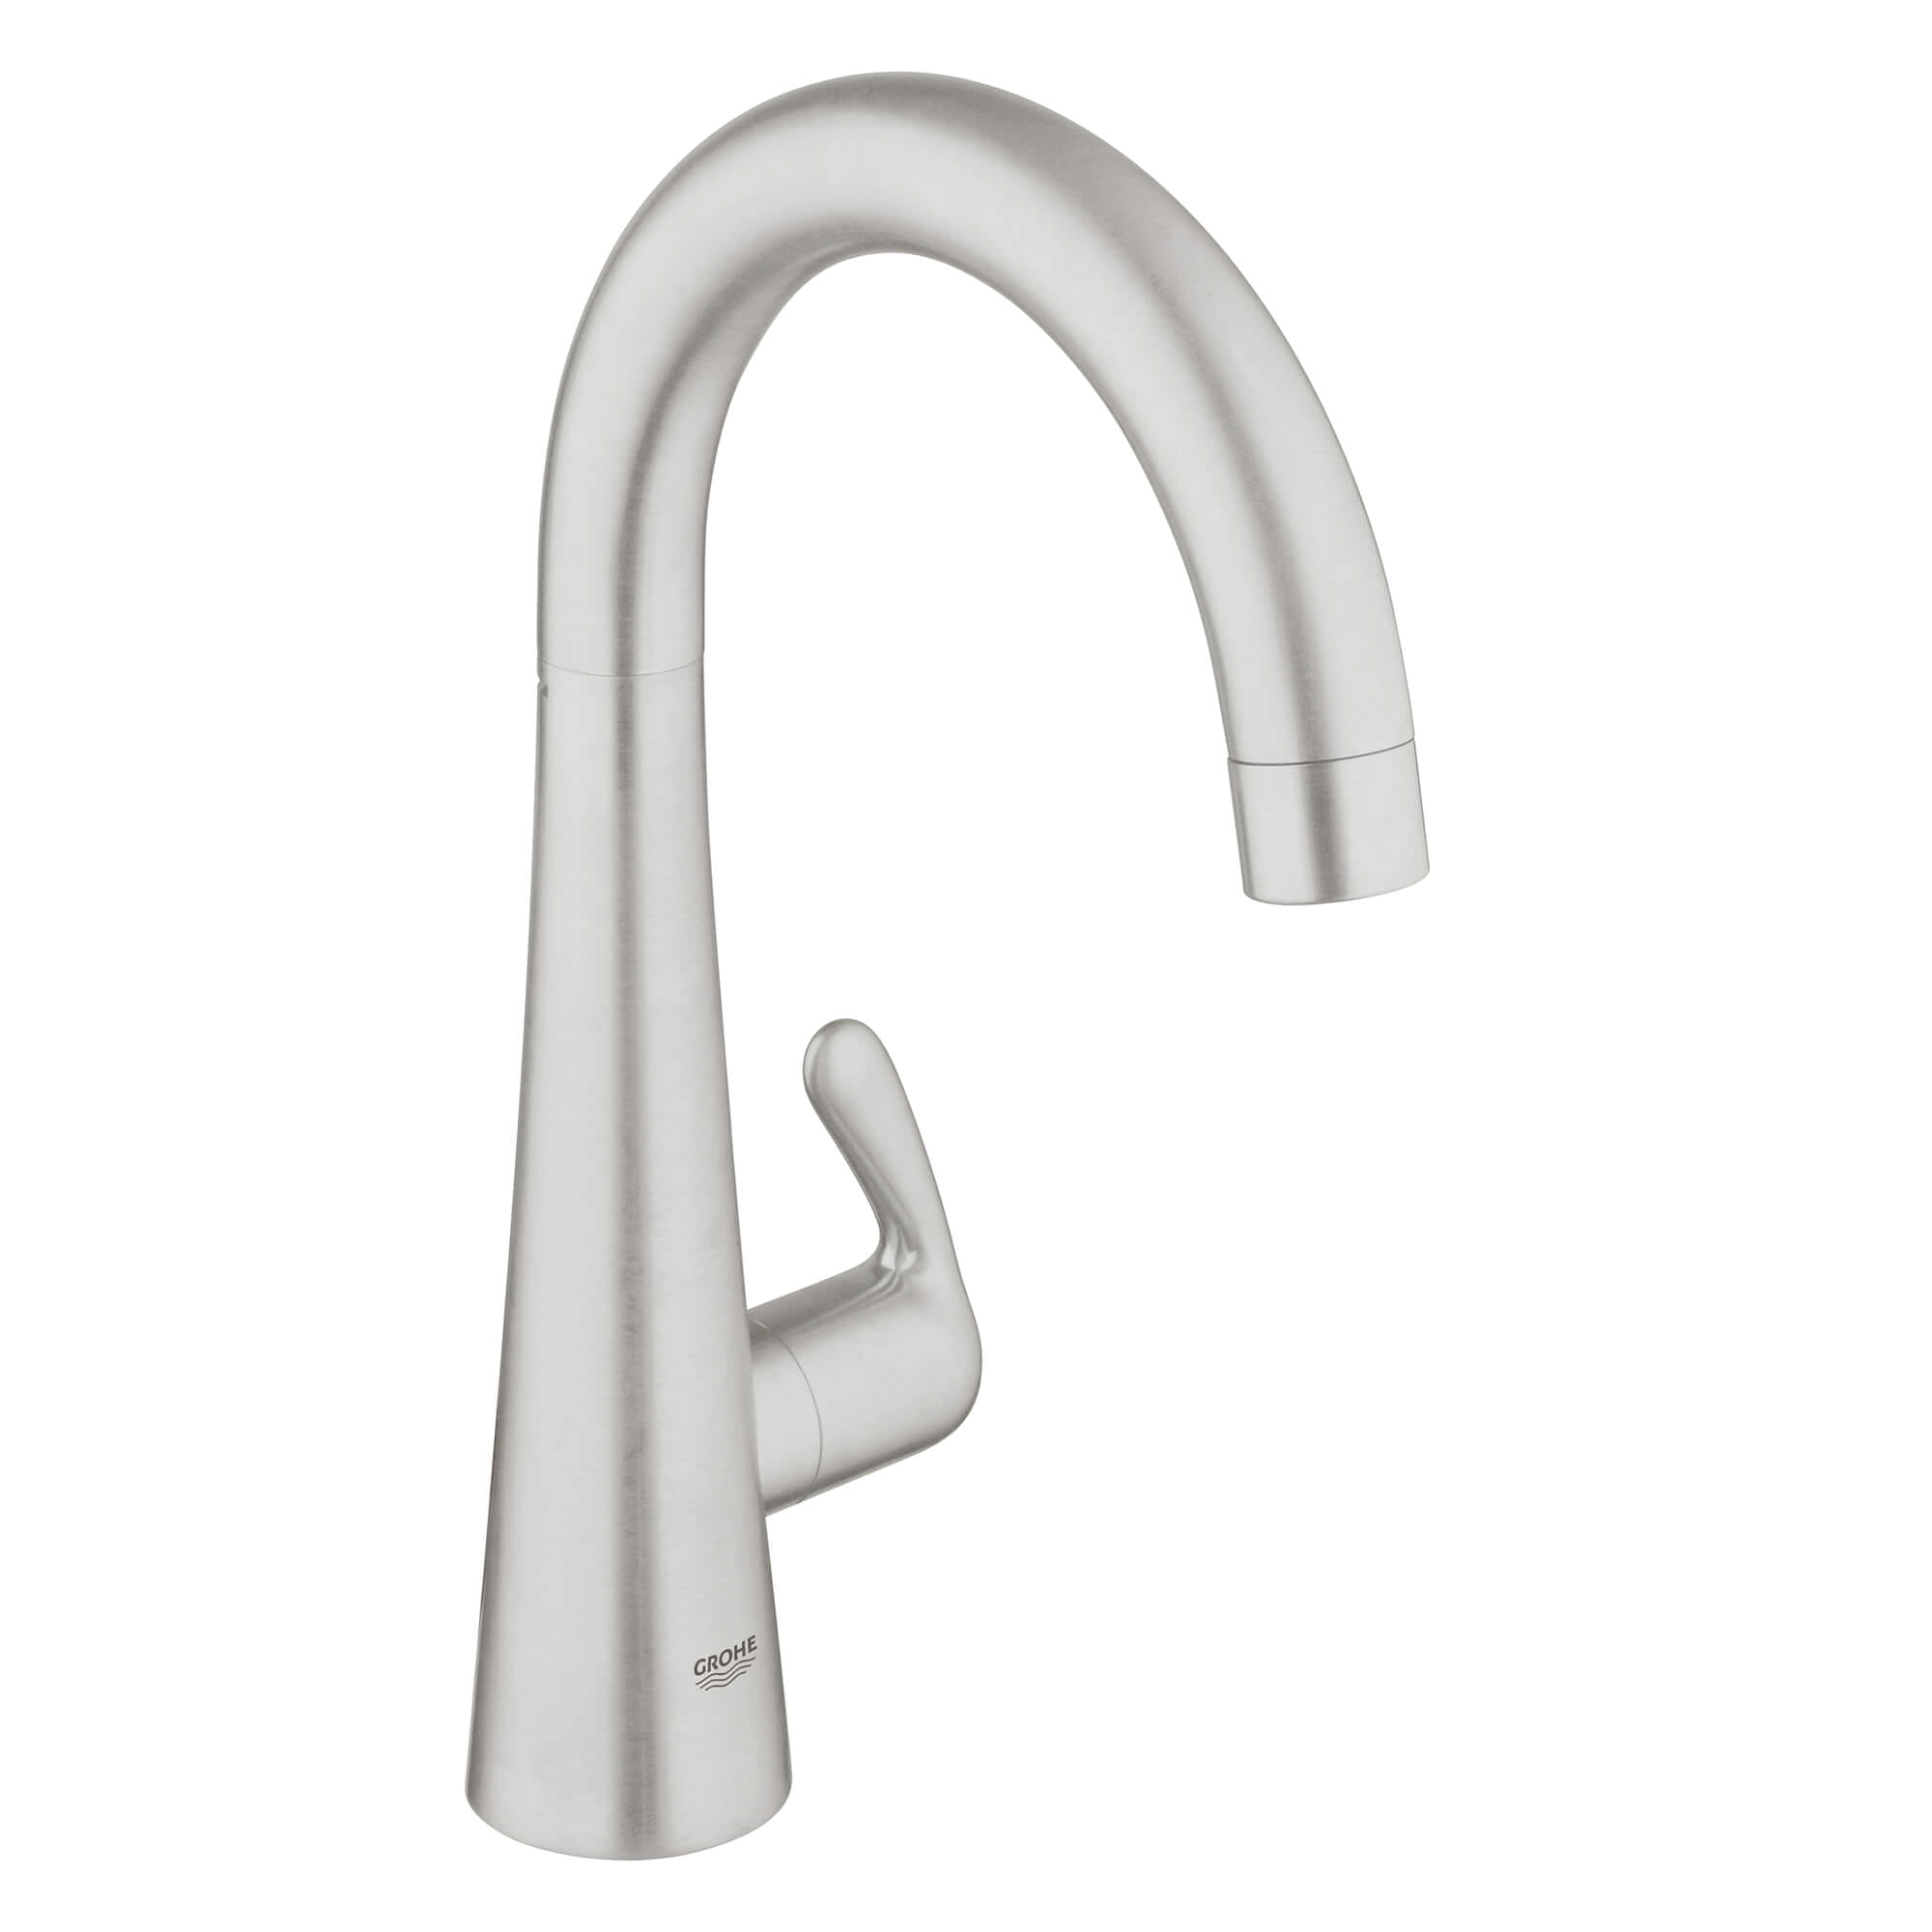 Single Handle Pillar Tap Water Faucet 175 GPM GROHE SUPERSTEEL